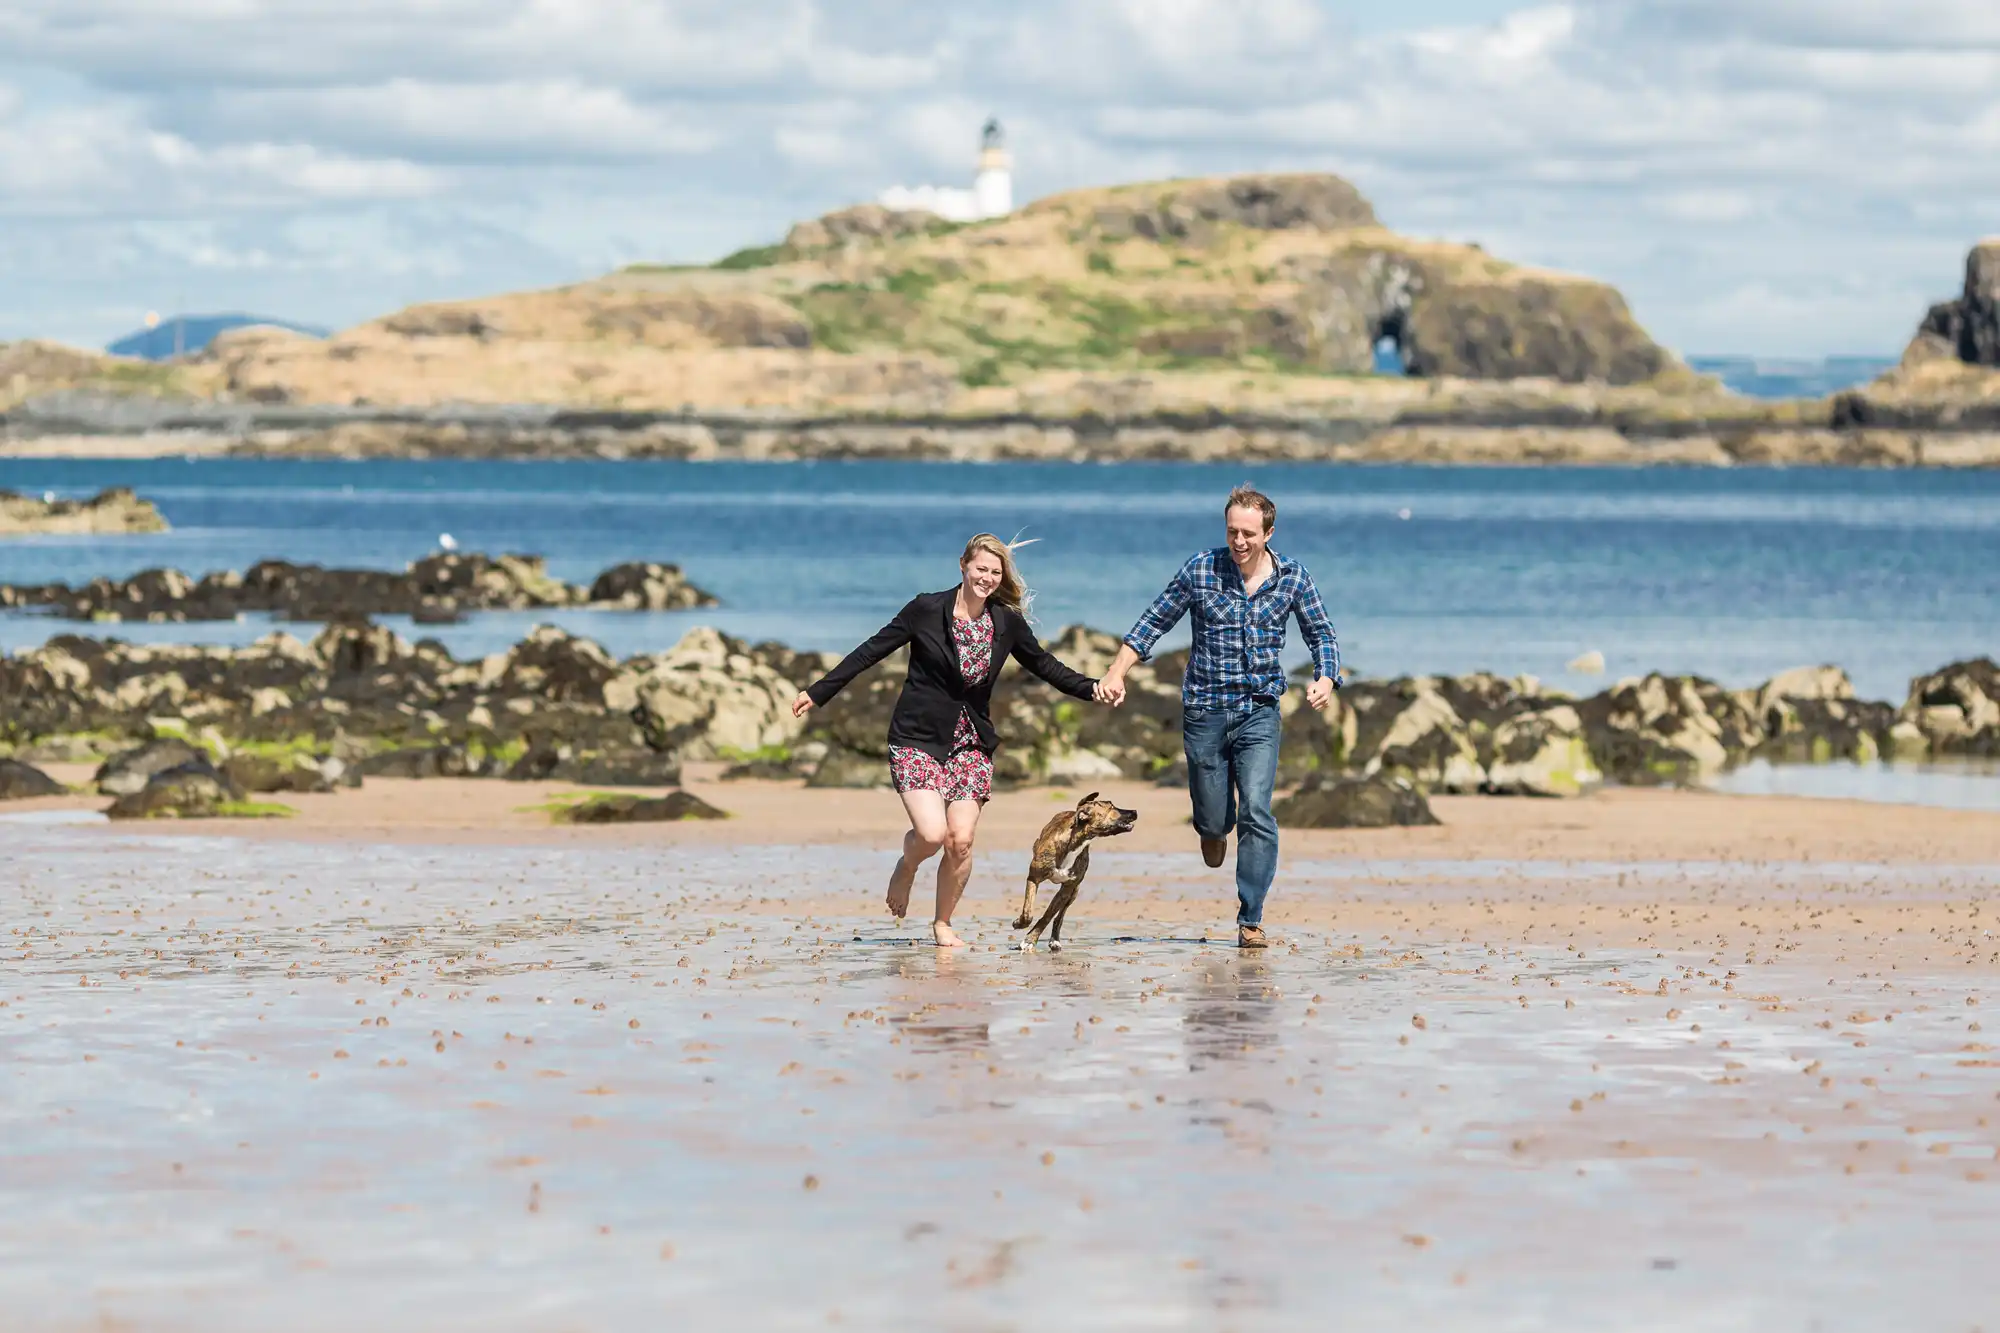 Two people and a dog running on a sandy beach with rocks and a lighthouse in the background.